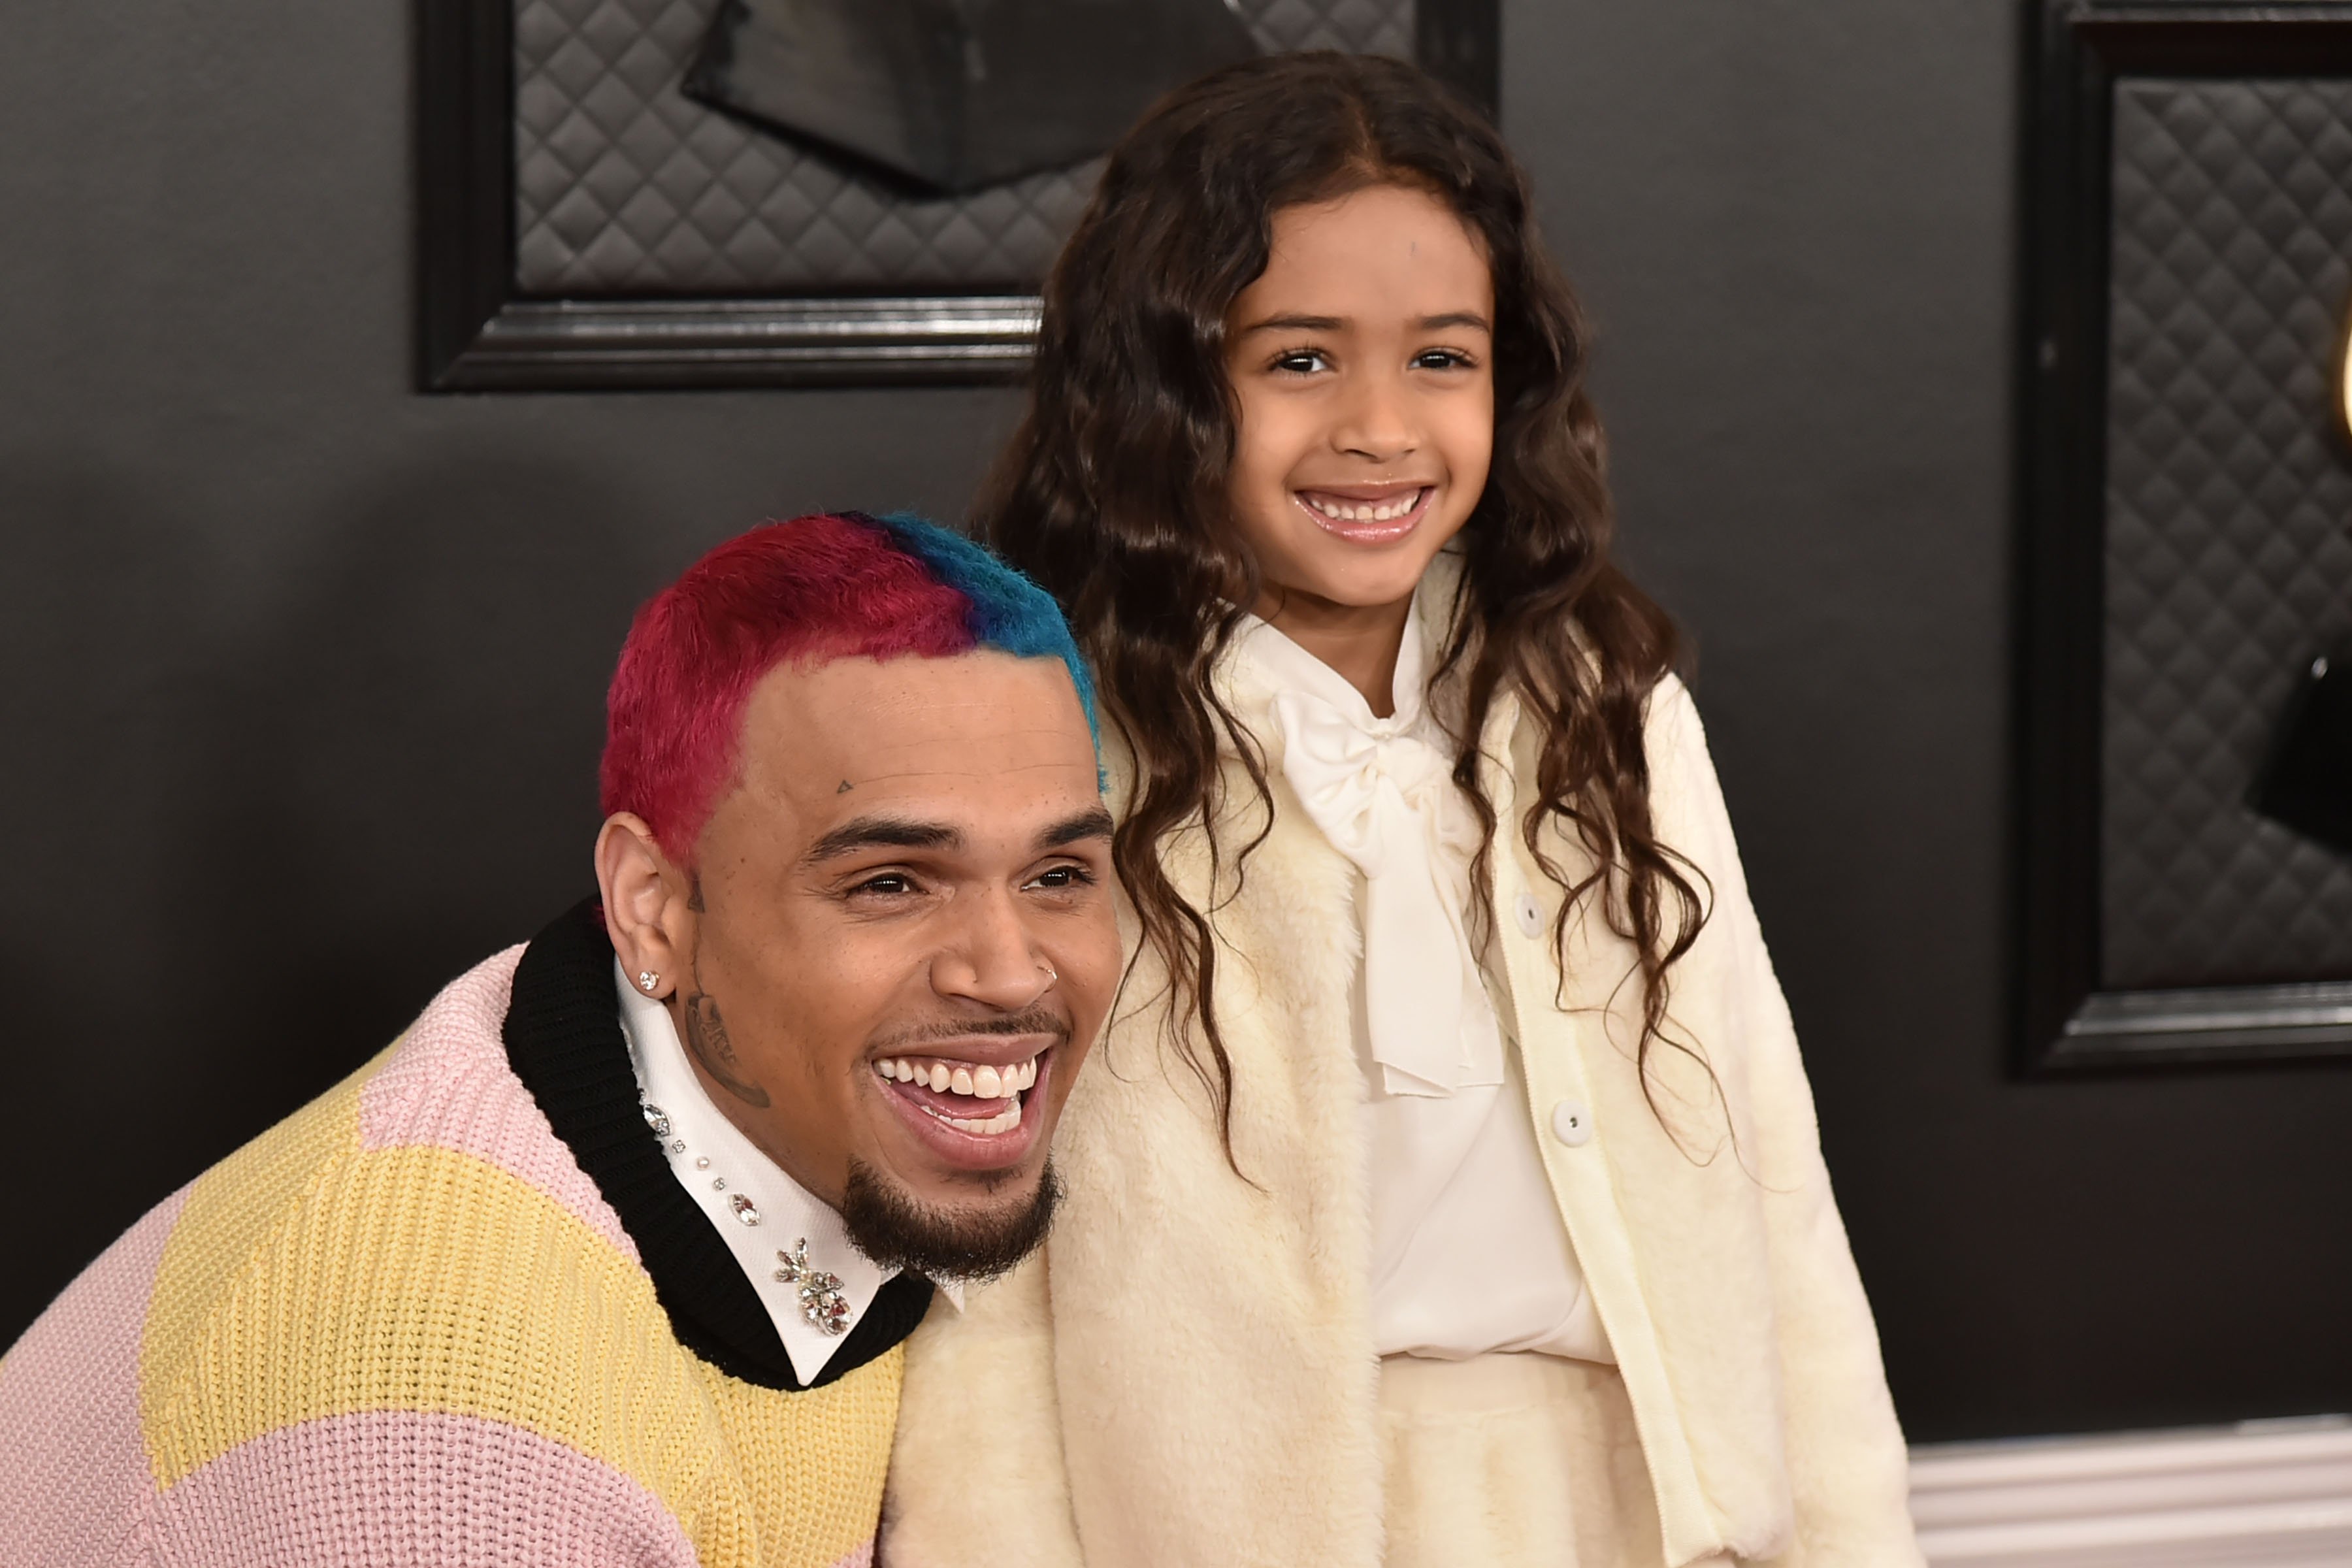 Chris Brown and his daughter Royalty Brown at the 62nd Annual Grammy Awards in 2020 | Source: Getty Images